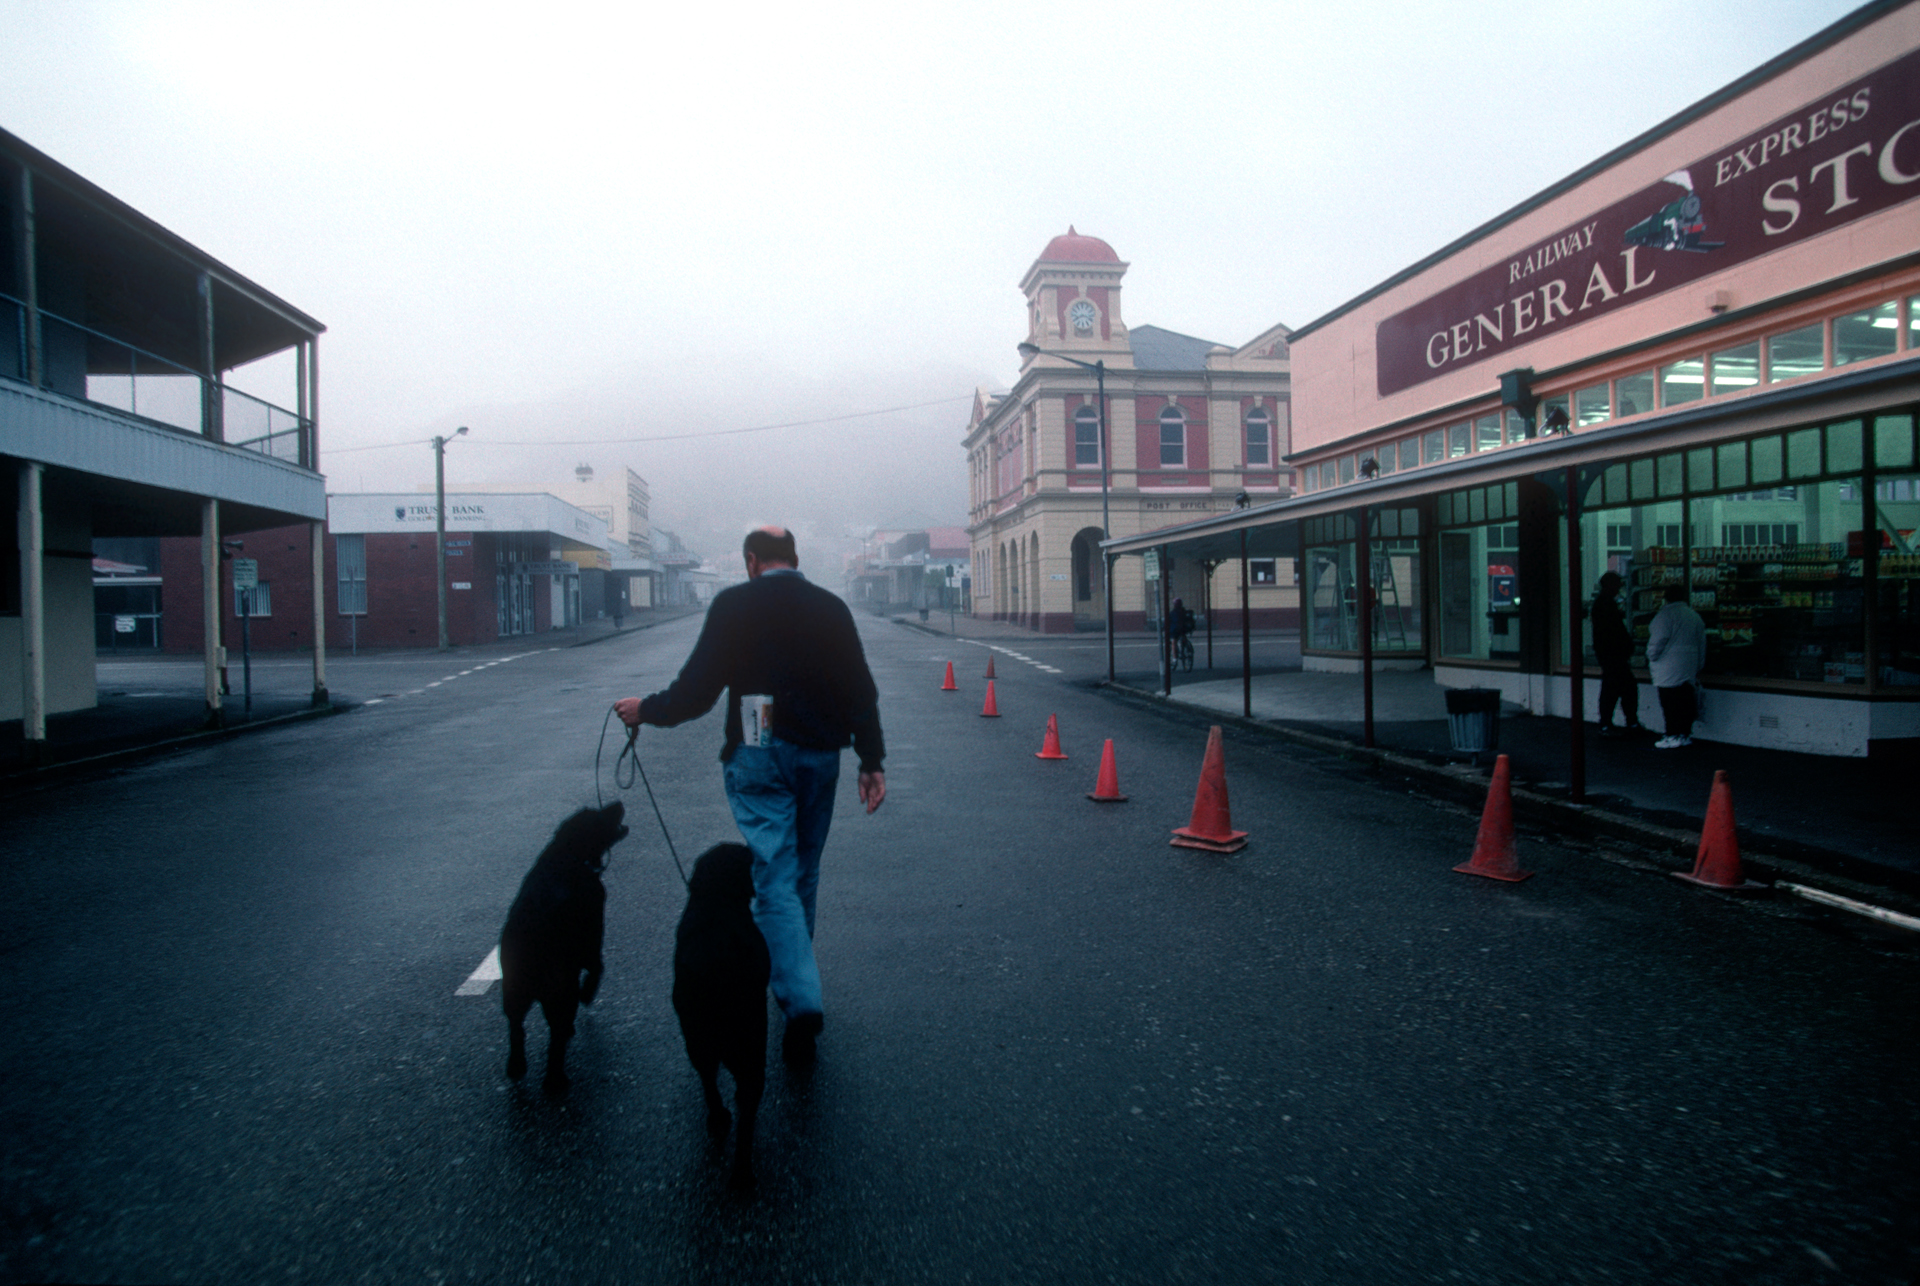  Heading for the coffeshop with dogs on the leash, a pedestrian crosses Main Street in early morning mist.  Queenstown  